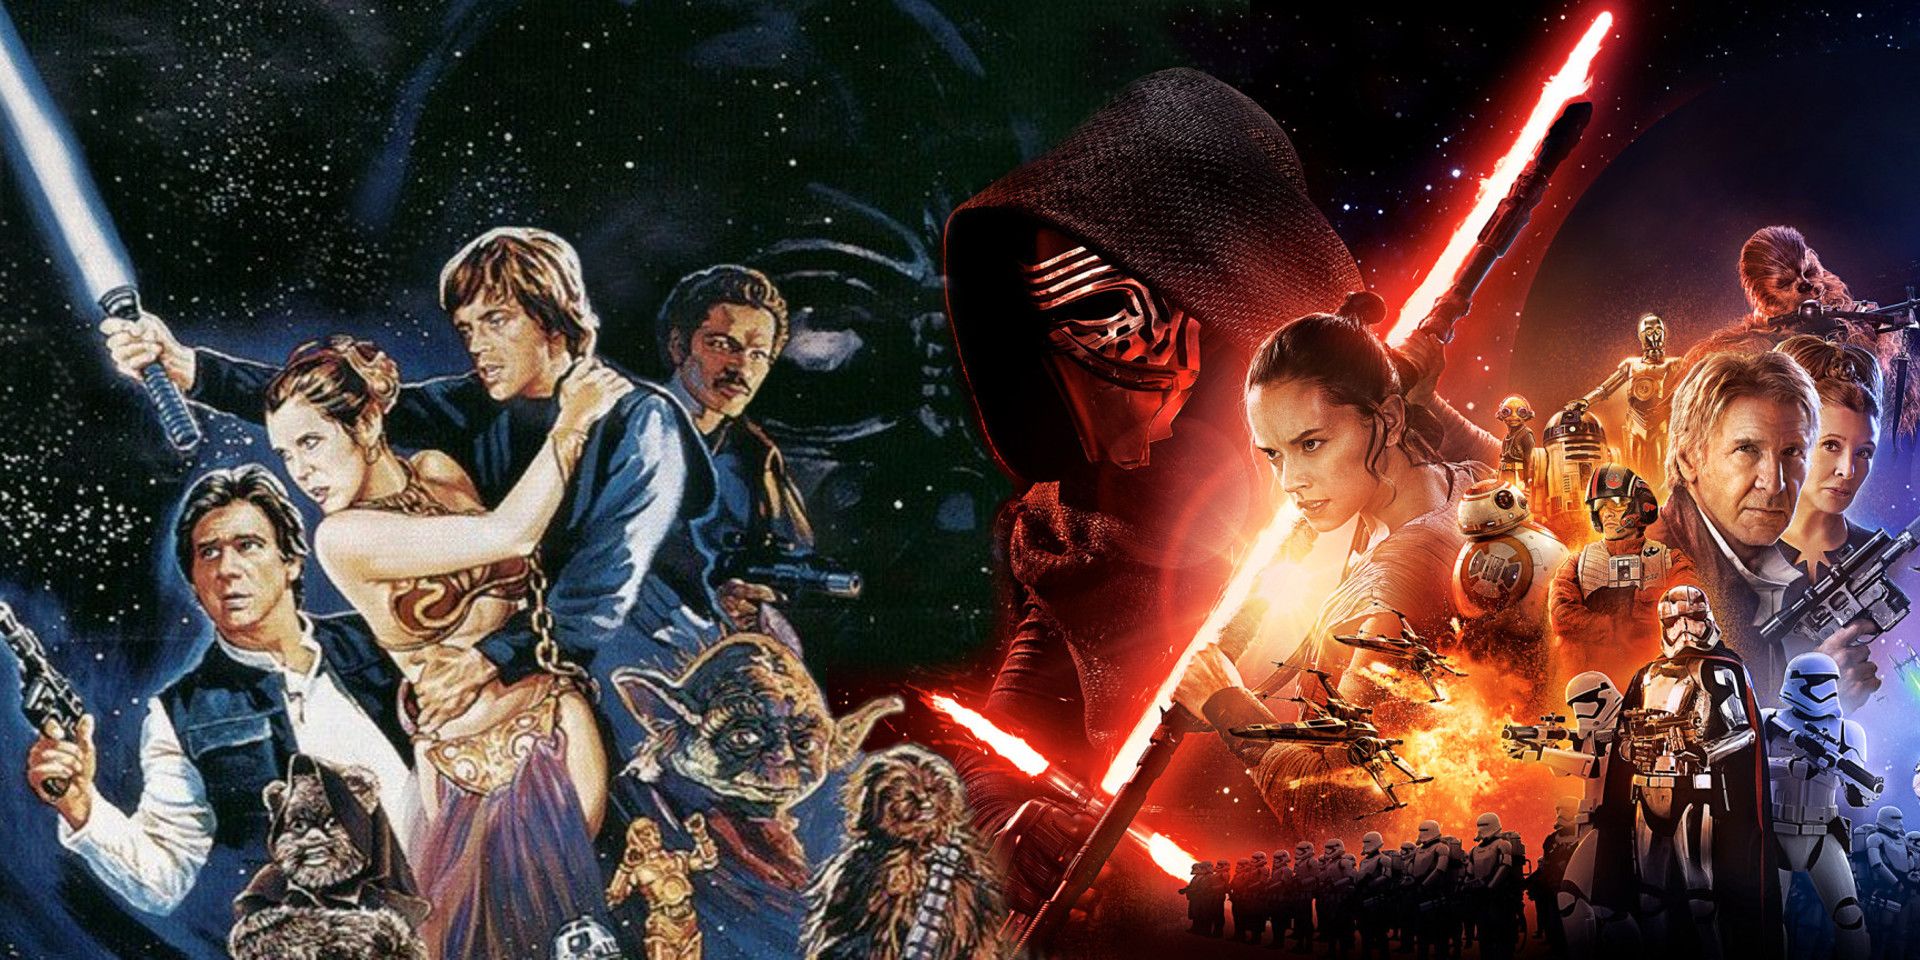 What Happens Between Return of the Jedi and The Force Awakens?